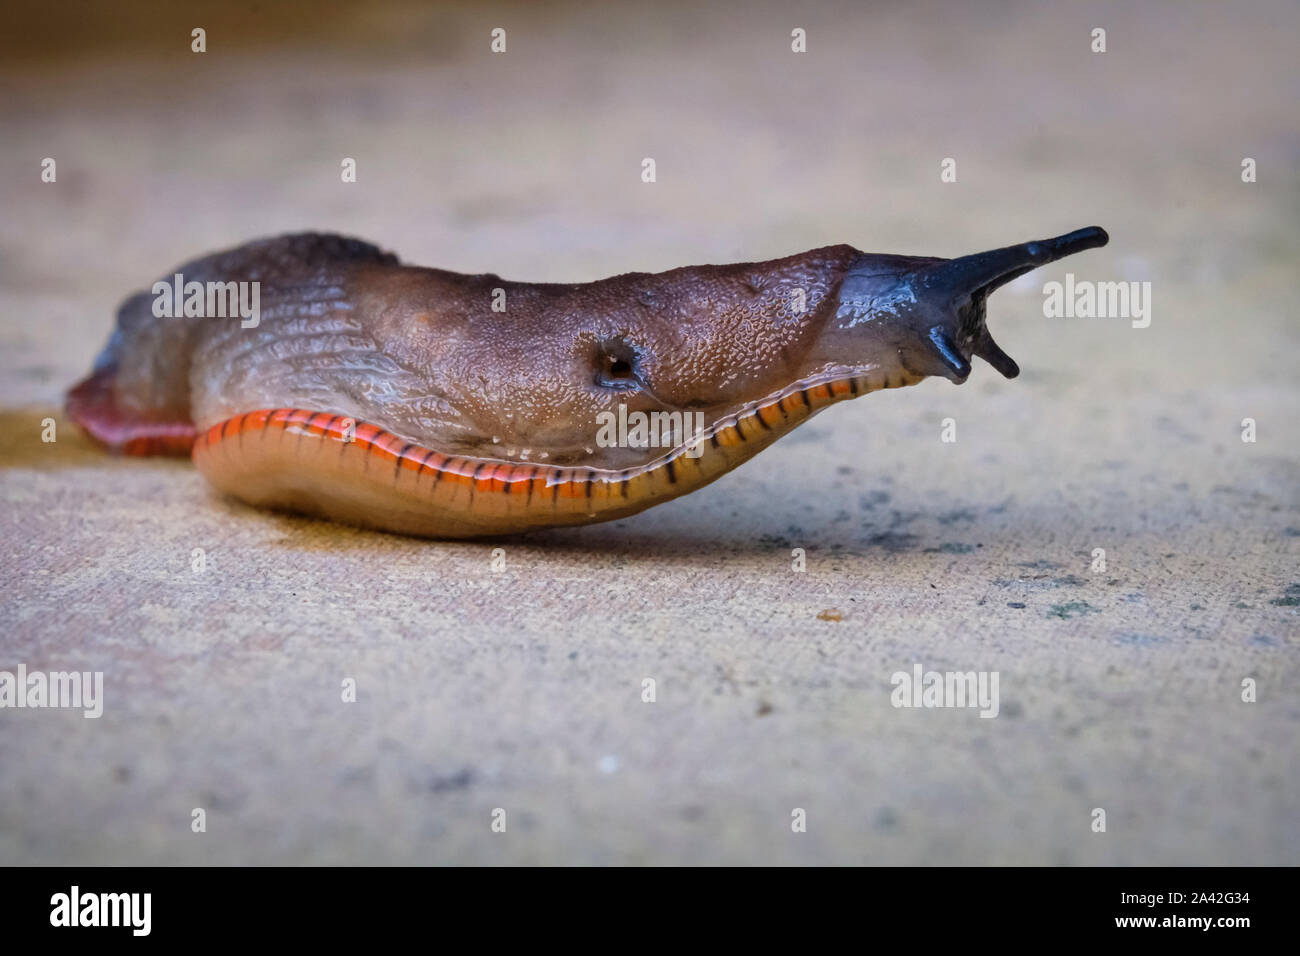 A slug crawls across a slab in a garden. This is probably Arion ater  the large black slug seen here in its brown form. Stock Photo